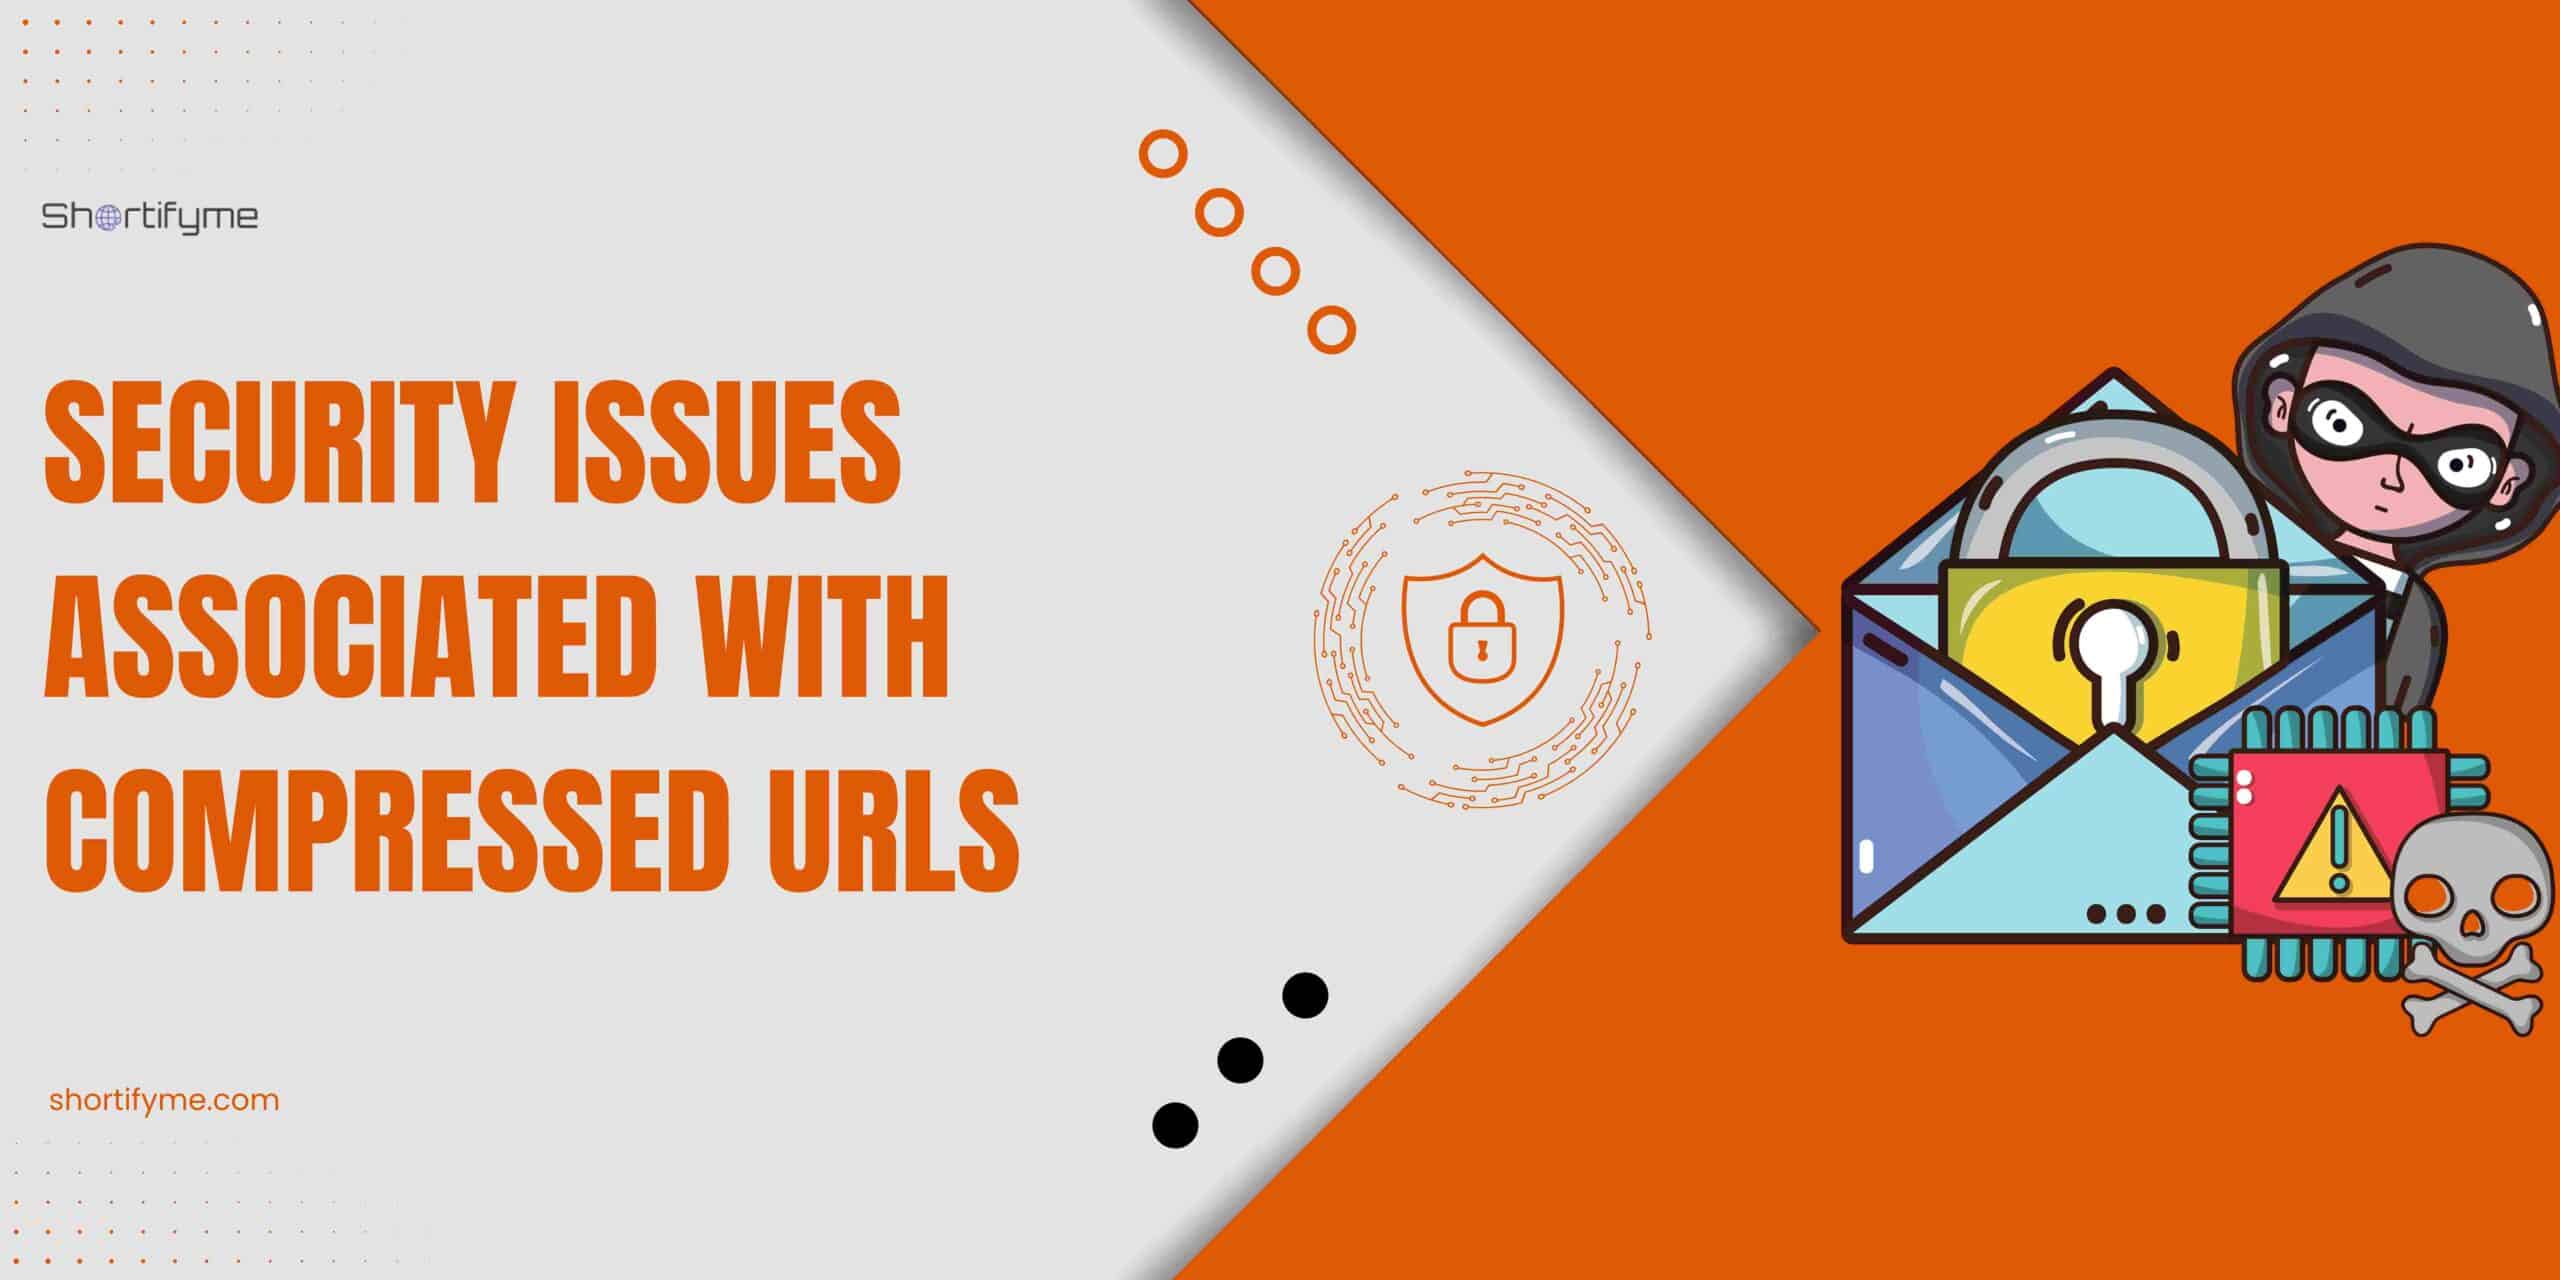 what security issue is associated with compressed urls